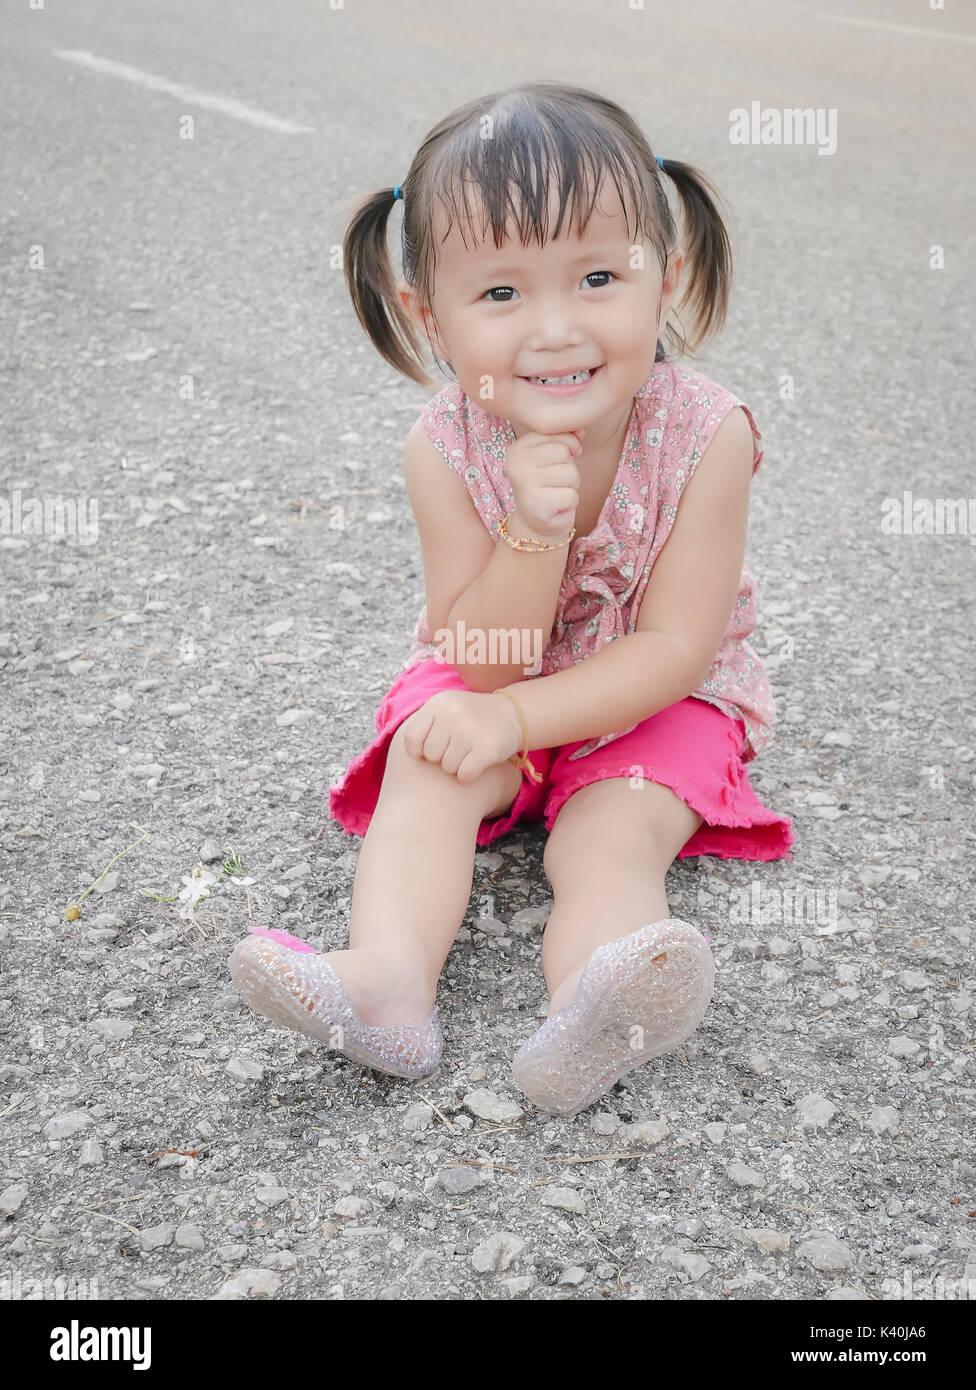 Little Asian Girl Sitting And Smiling On The Floor Stock Photo